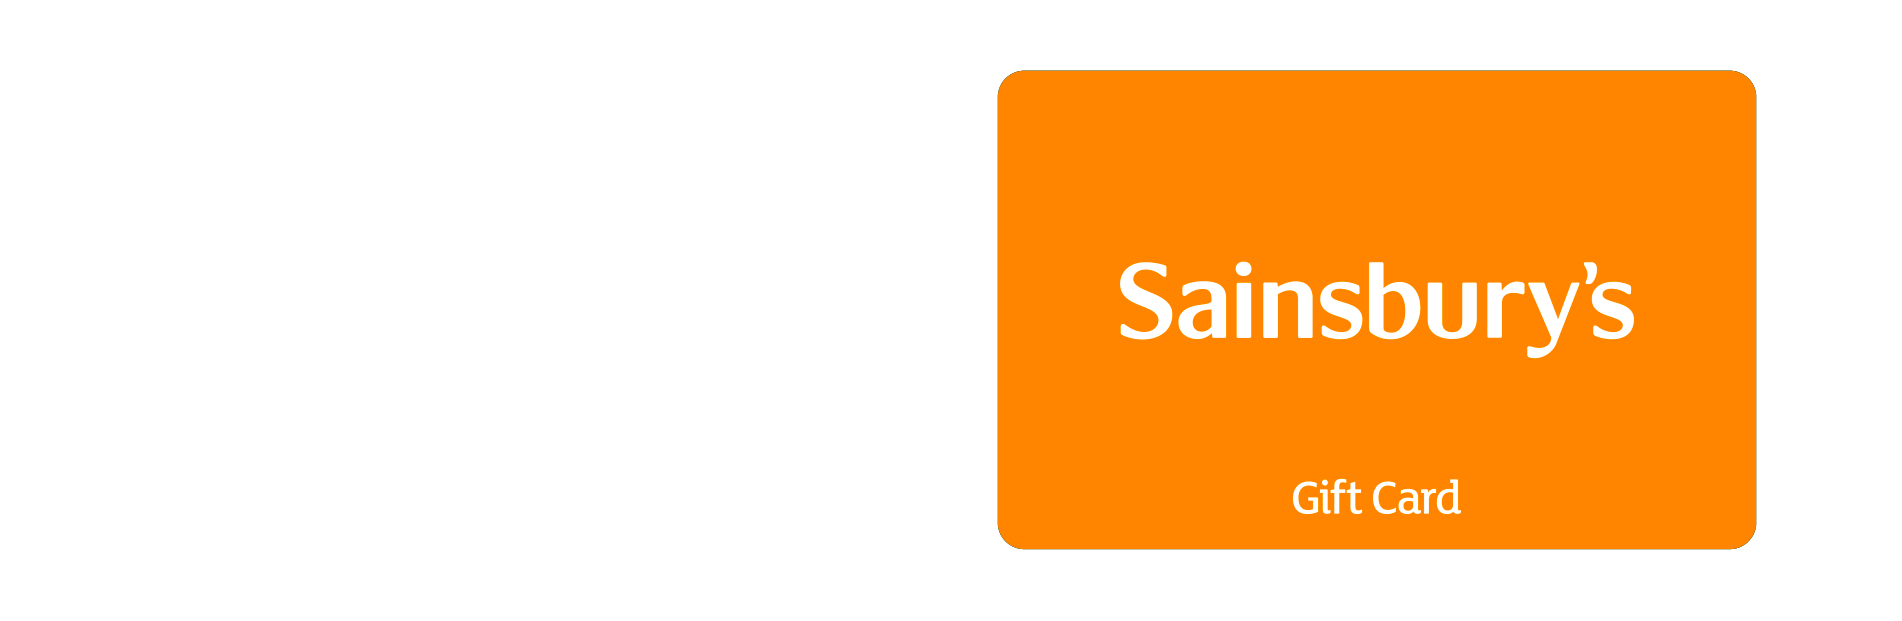 Sainsbury's  Gift Card - Send the Perfect Gift Banner Image